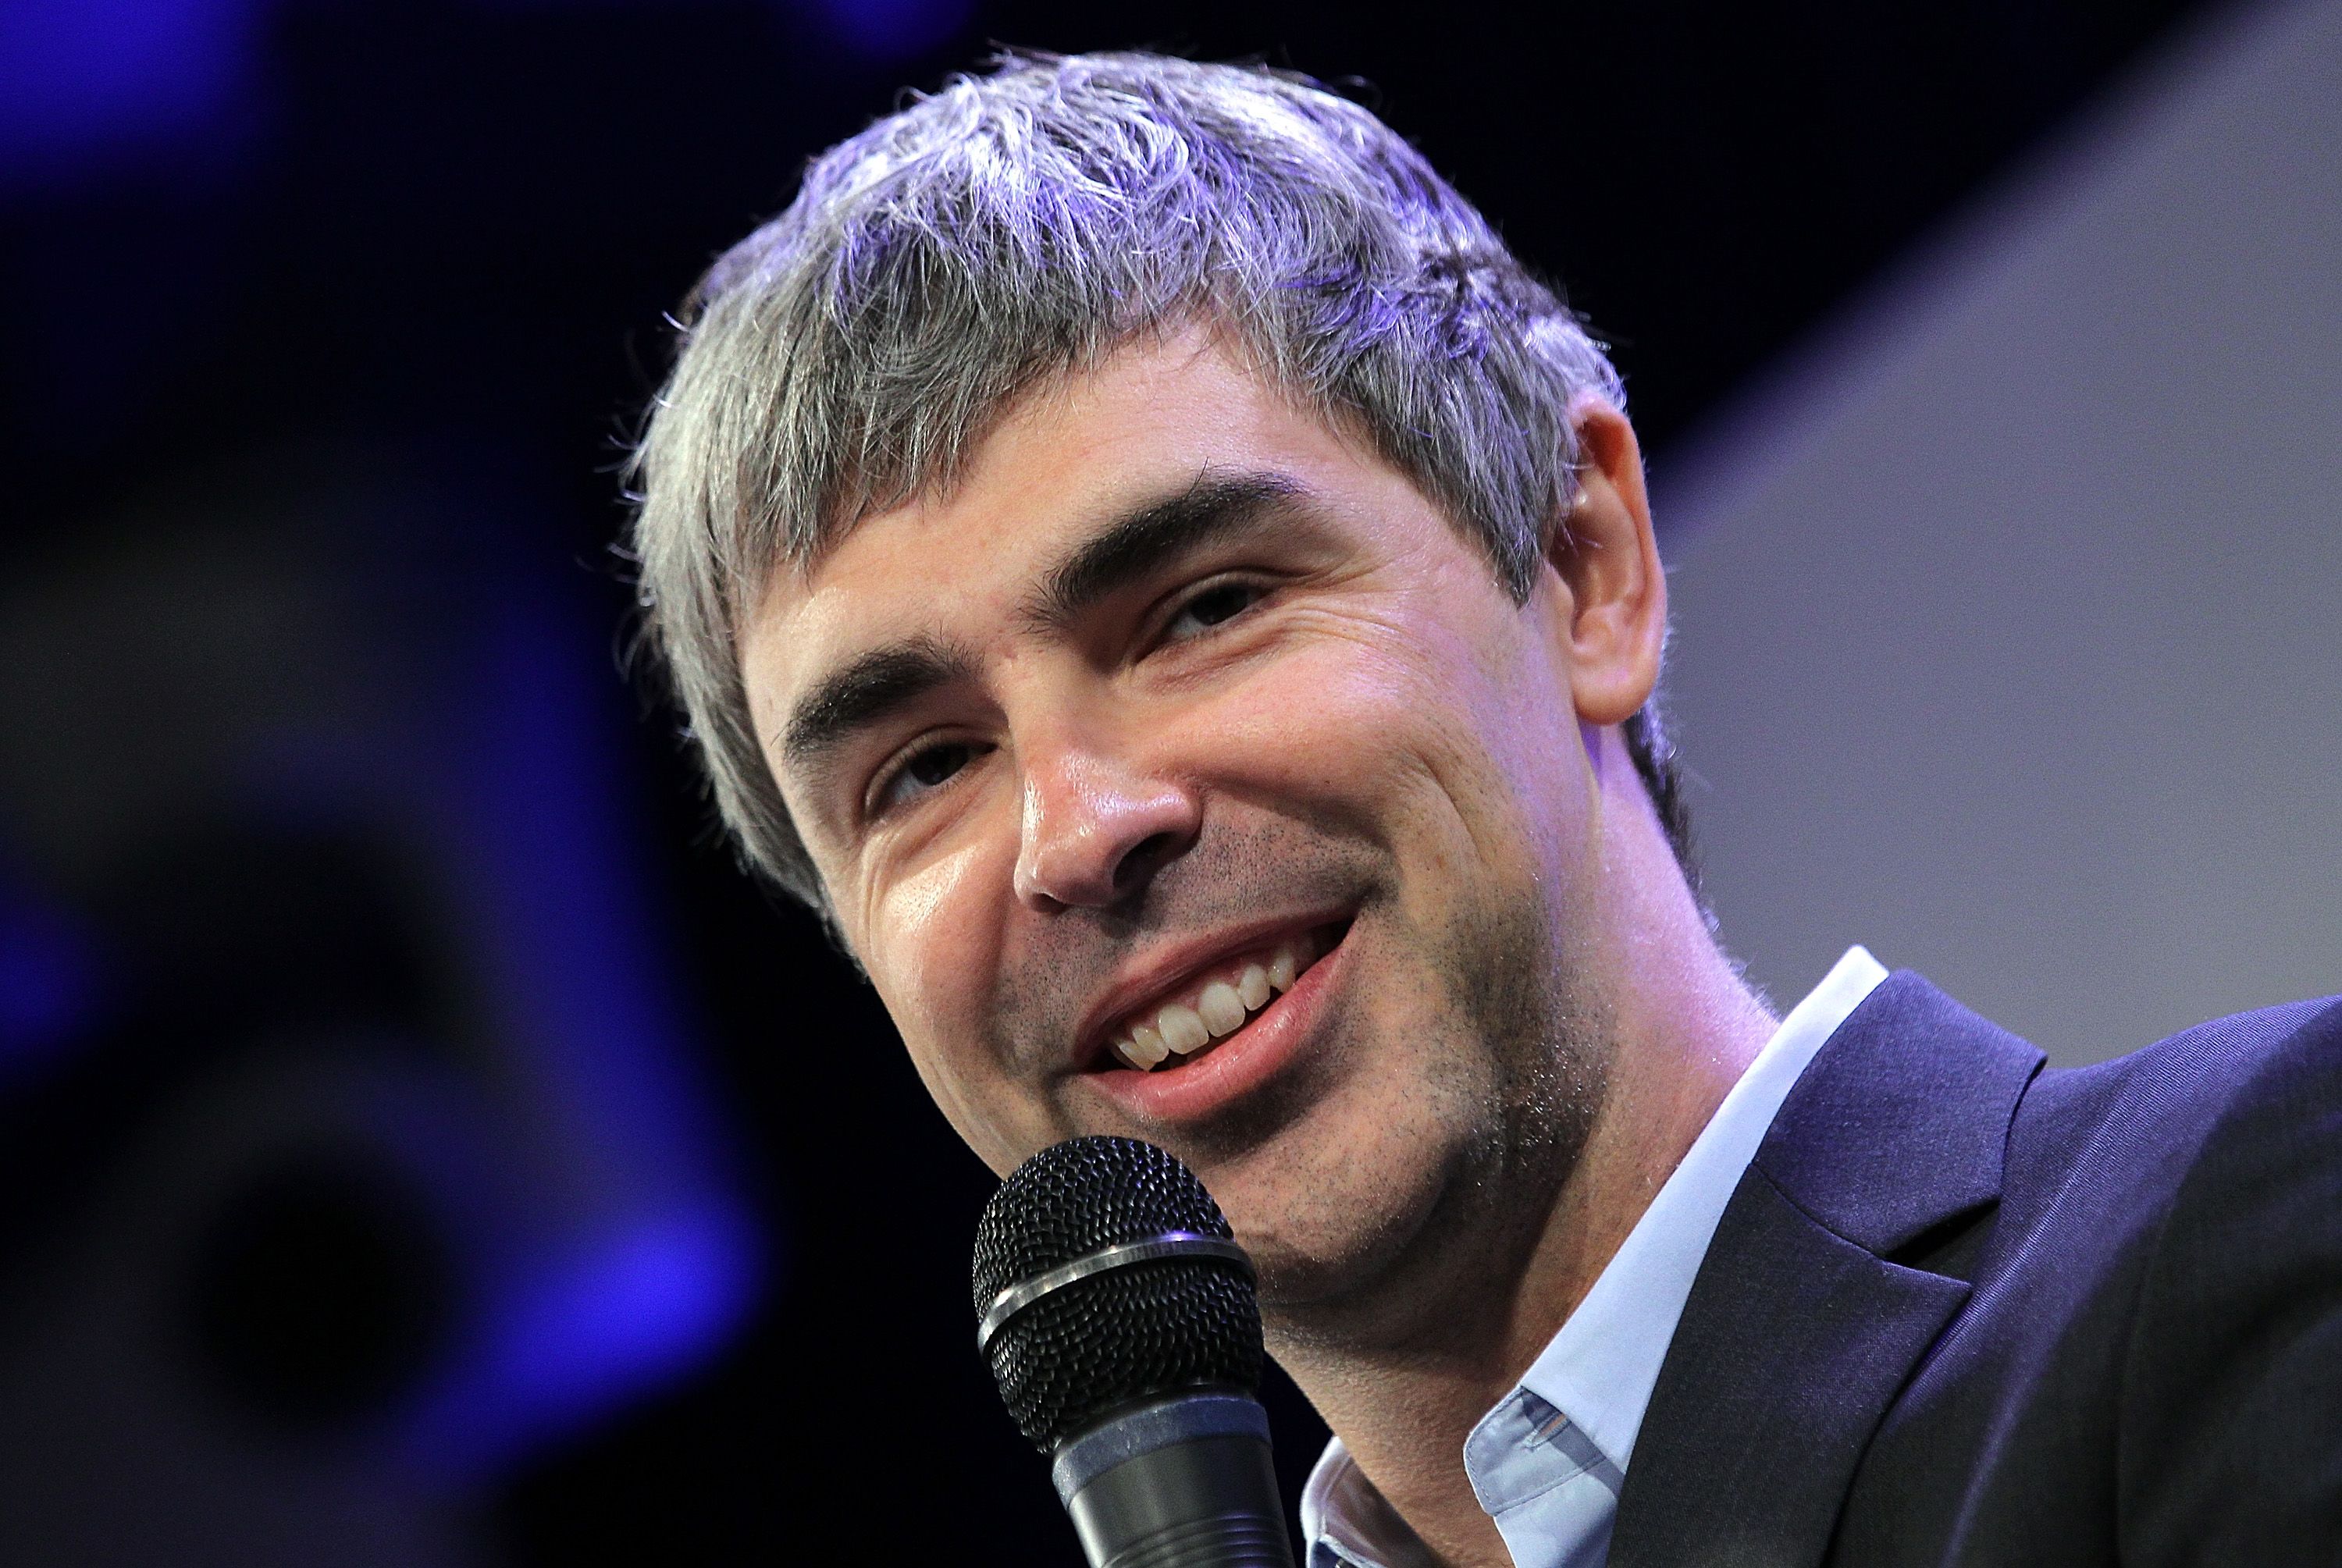 Larry Page wearing a black suit while holding a mic